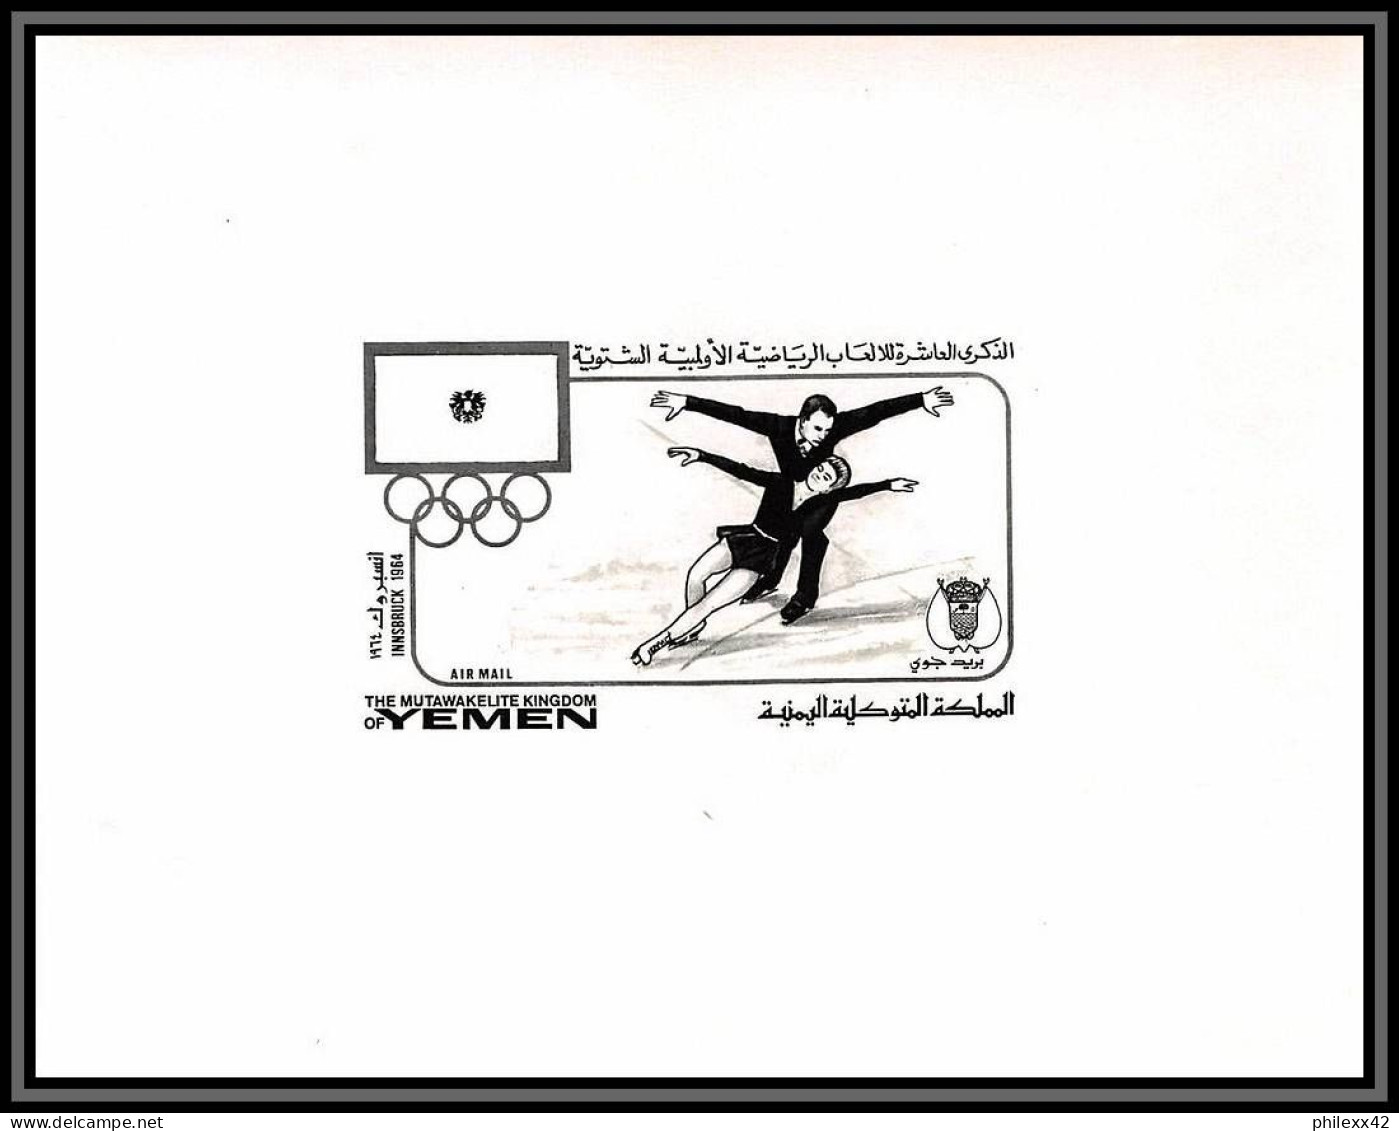 Yemen royaume (kingdom) - 4293 N°537 4 ice dance proof jeux olympiques olympic game grenoble 1968 ** MNH